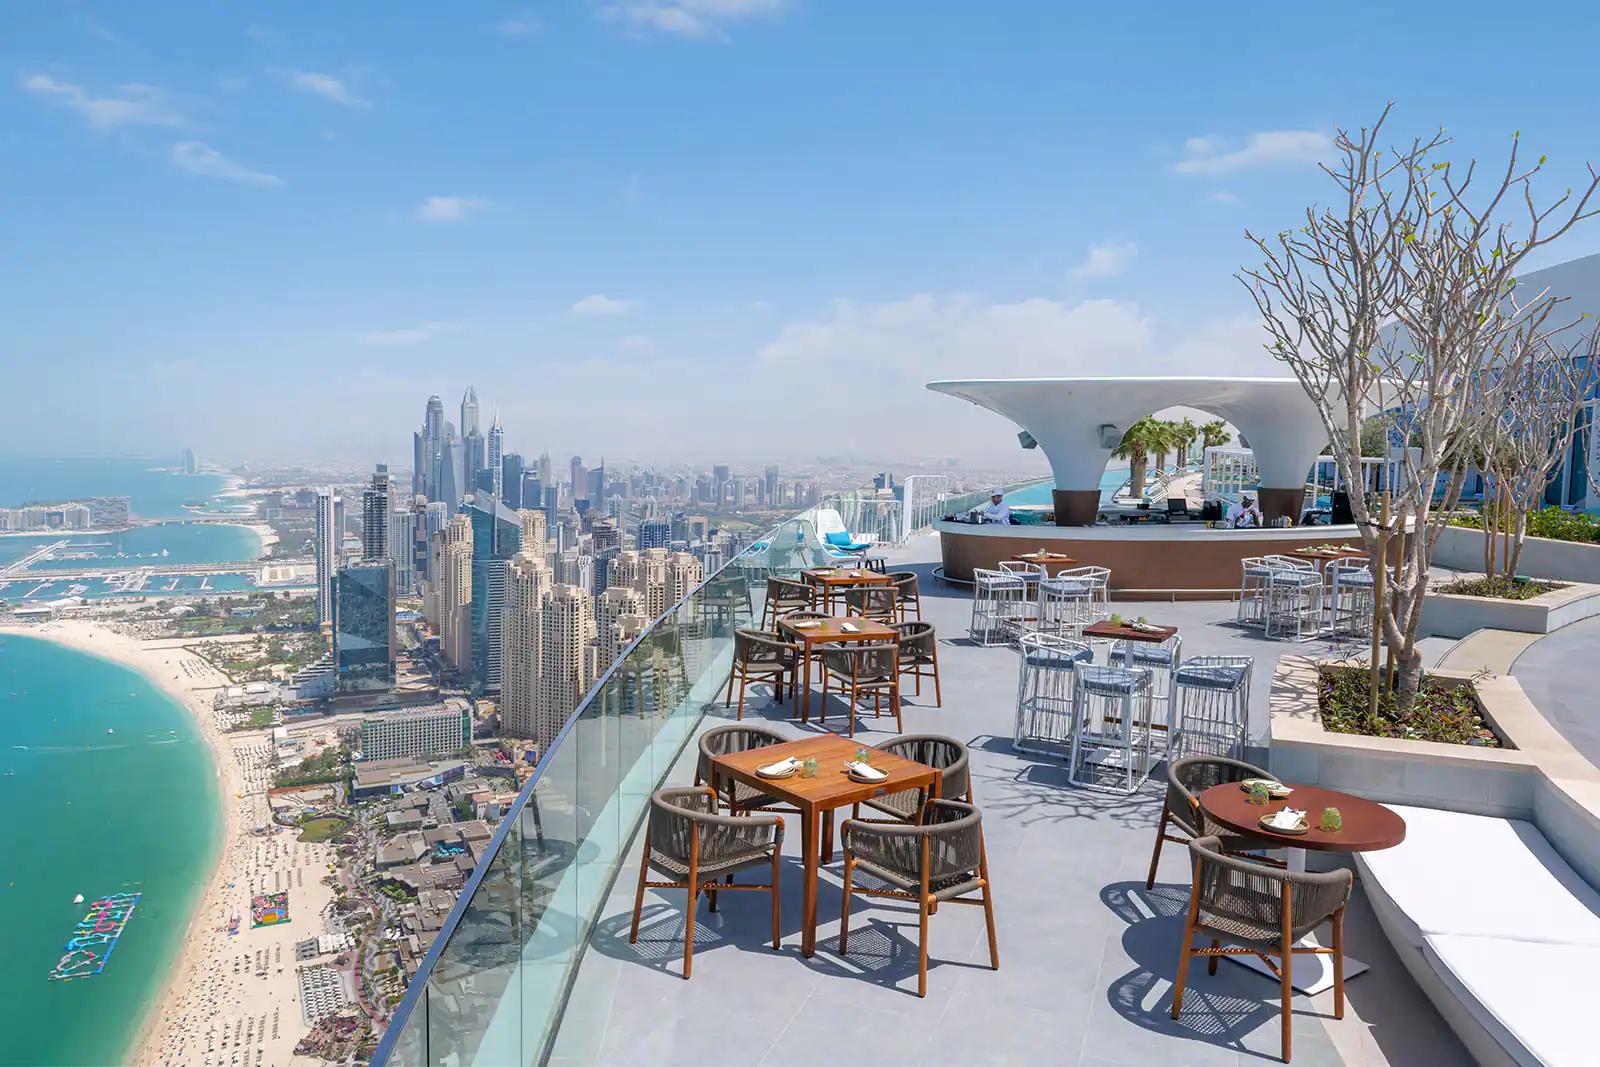 Drinks with a view: Dubai's Best Rooftops